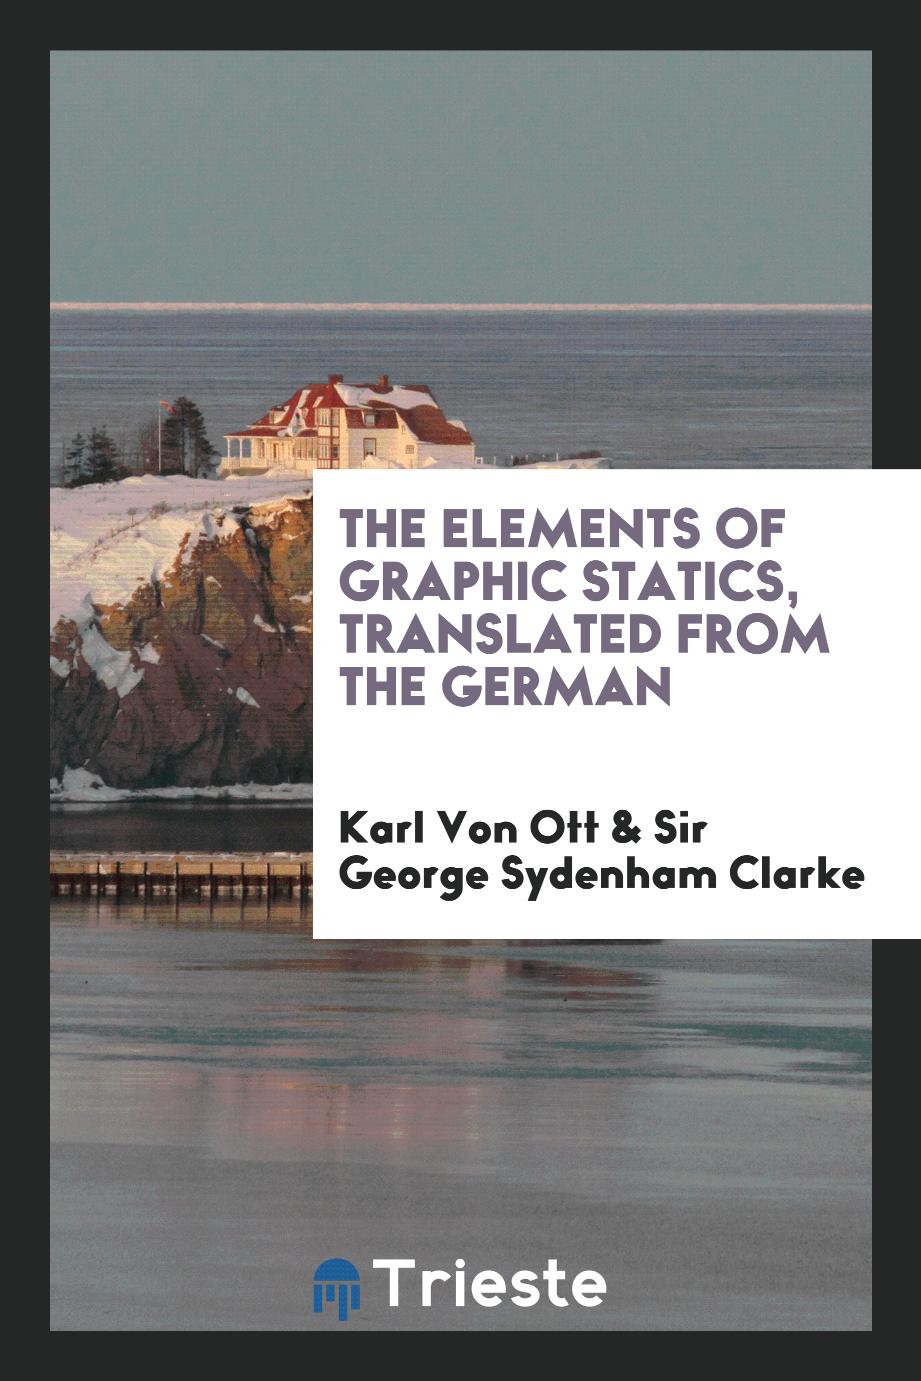 The Elements of Graphic Statics, Translated from the German